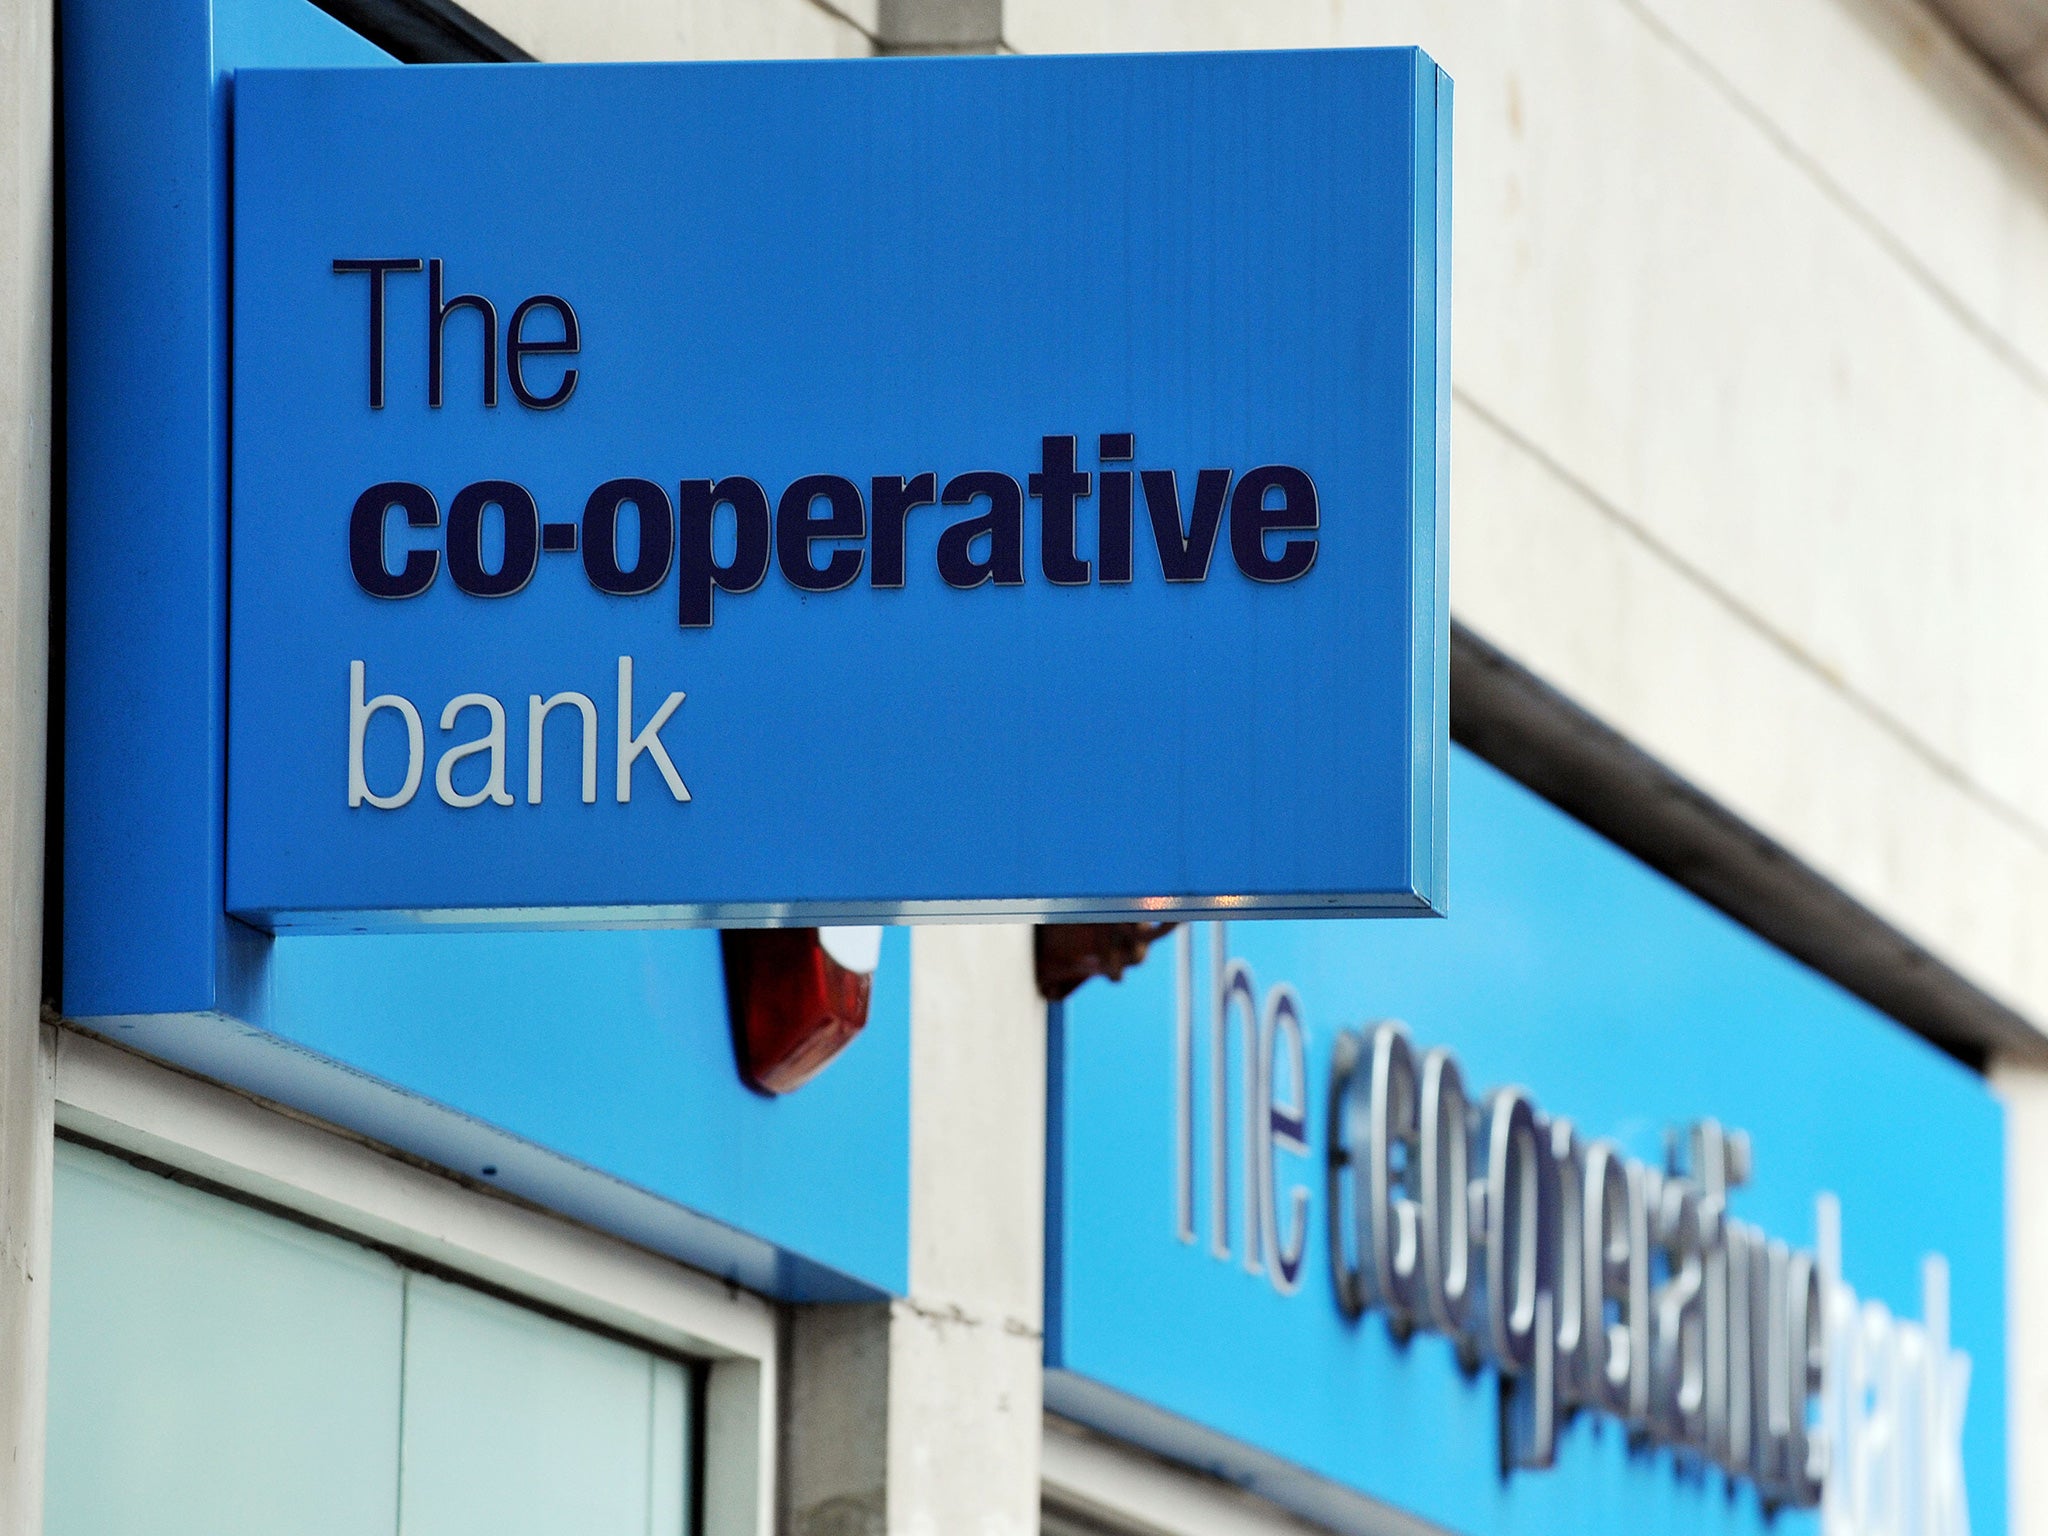 The lowest-ever two year fixed rate mortgage has been launched by the Co-operative Bank